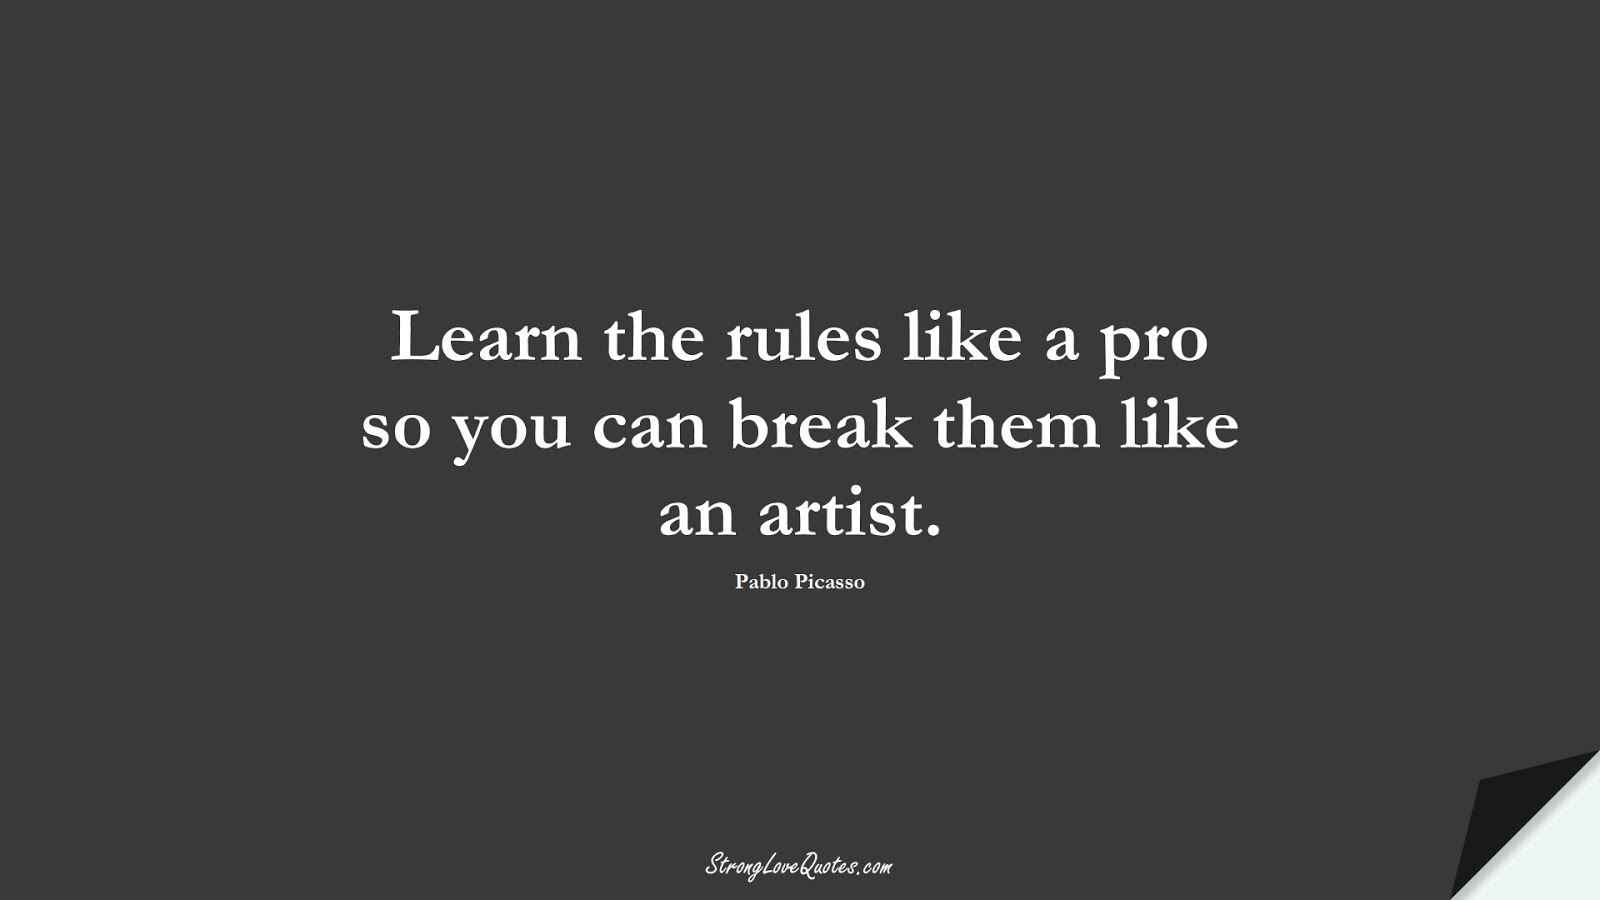 Learn the rules like a pro so you can break them like an artist. (Pablo Picasso);  #LearningQuotes